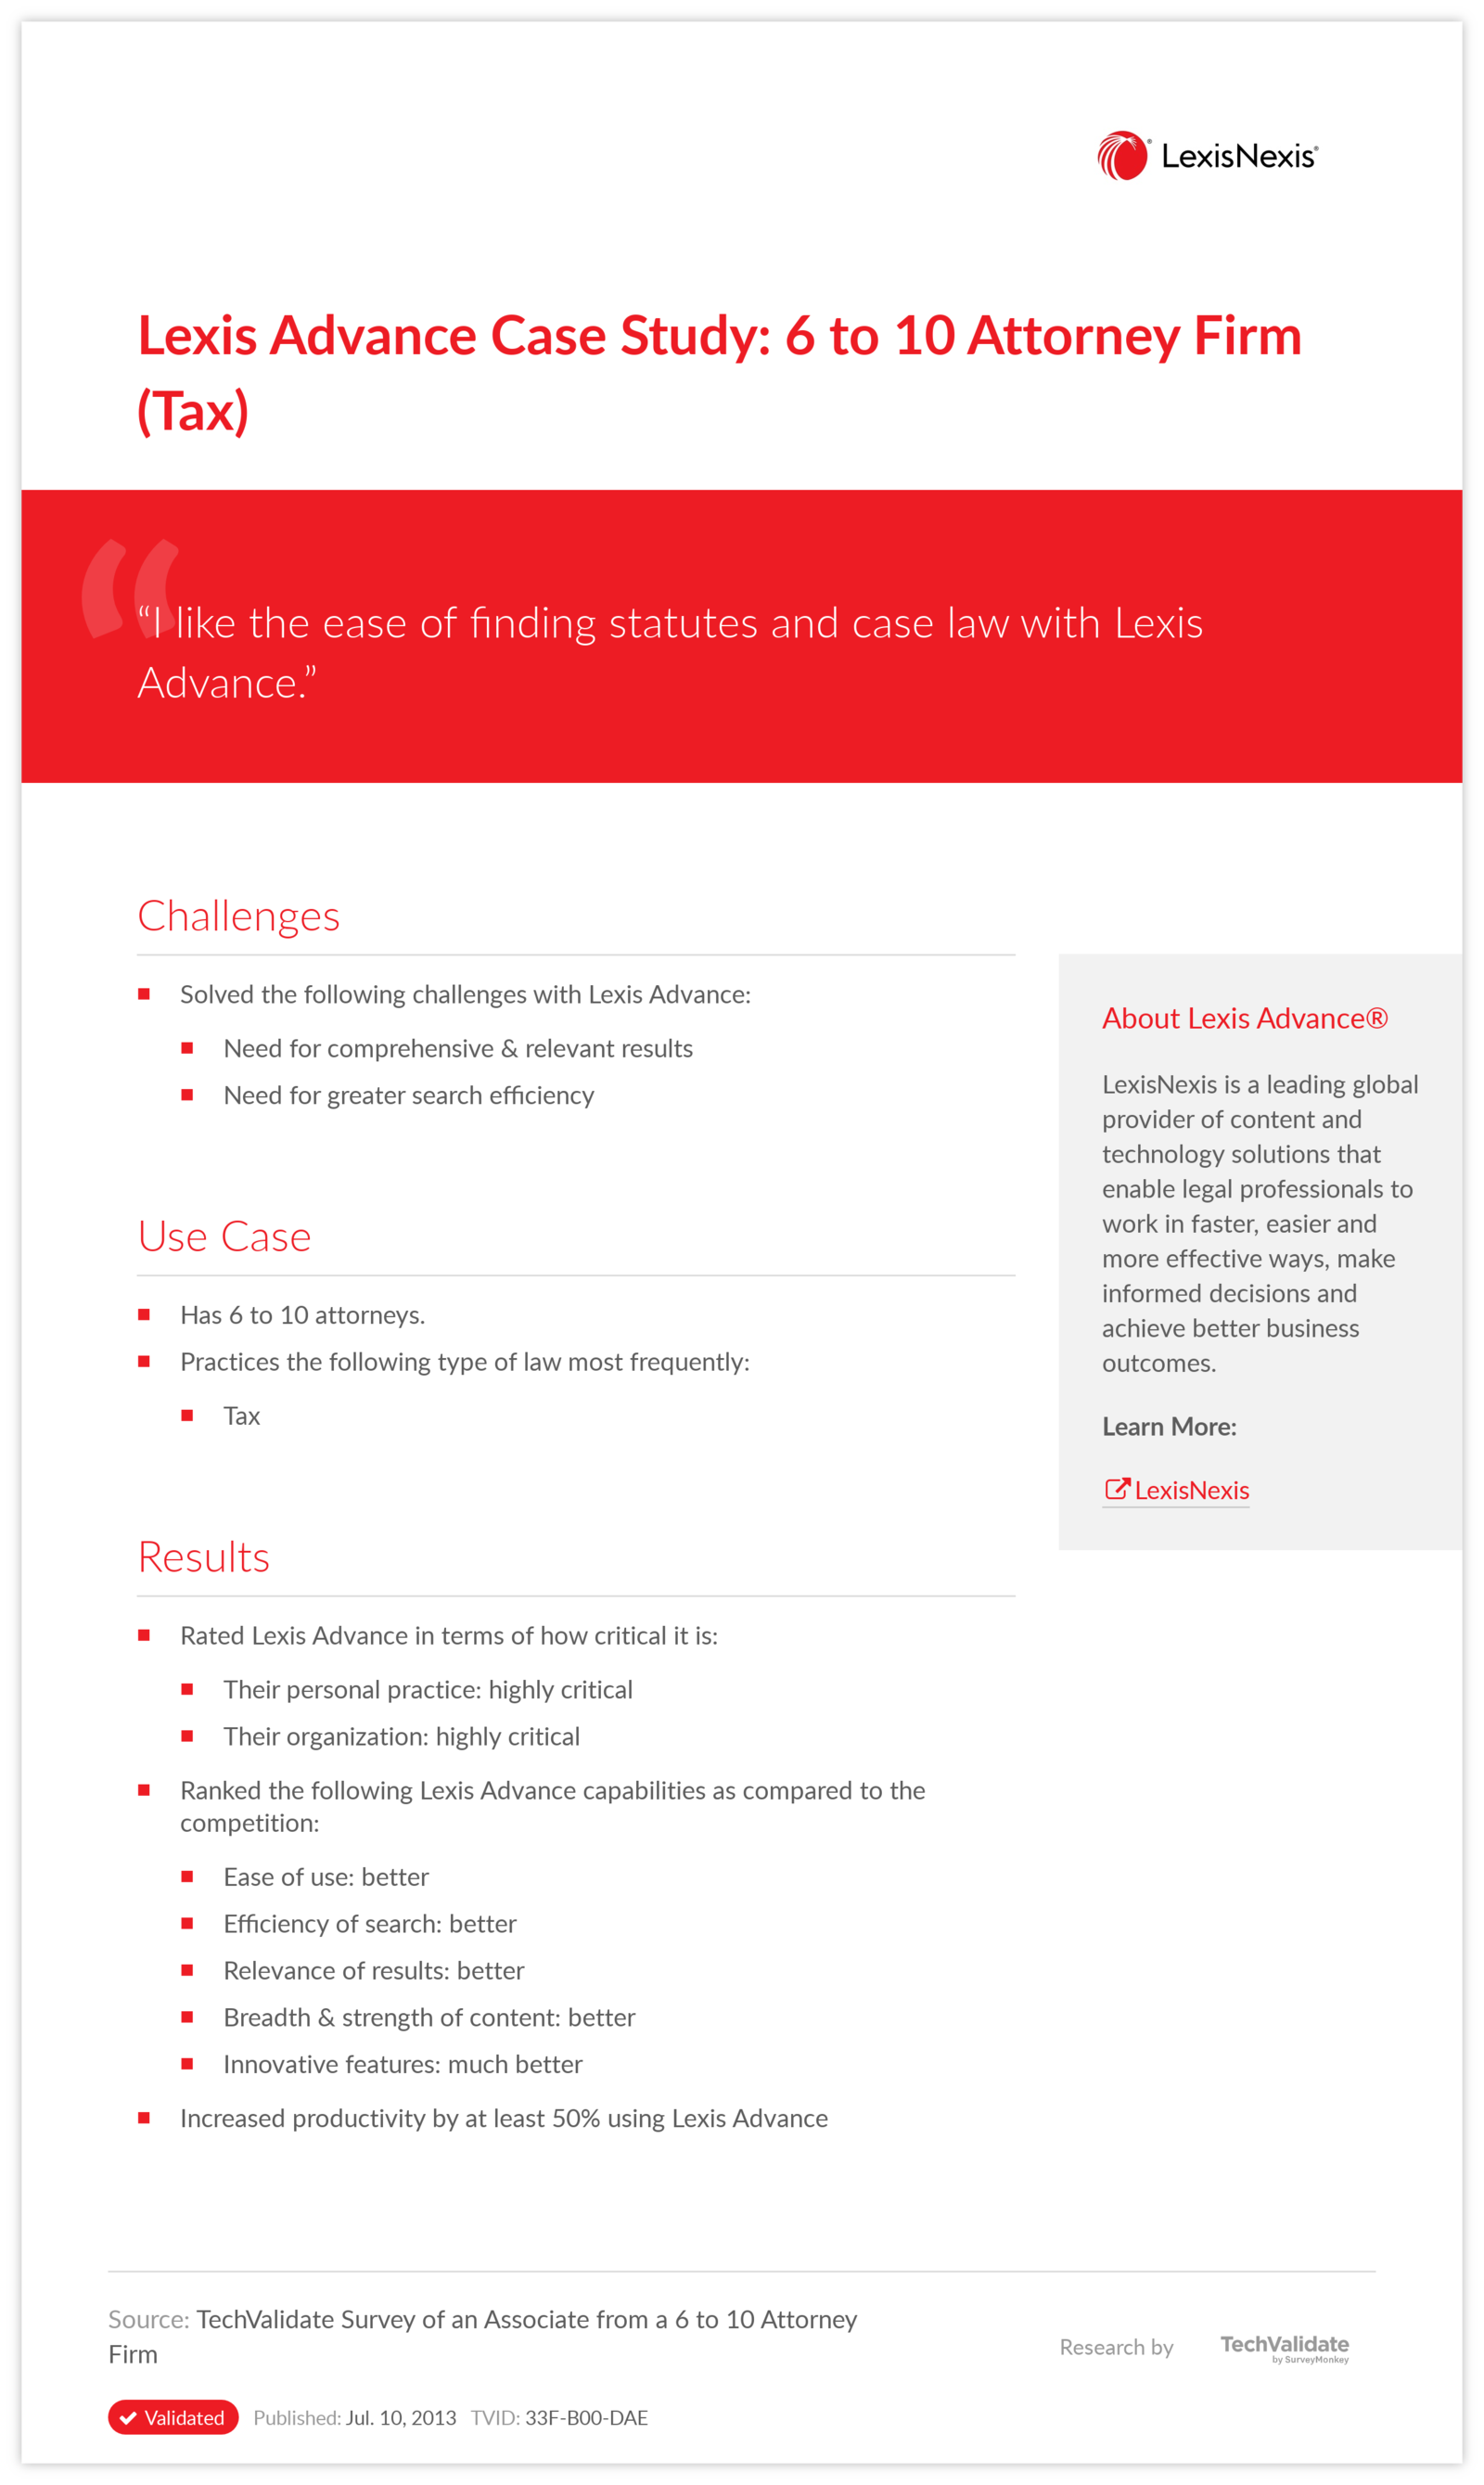 Lexis Advance Case Study: 6 to 10 Attorney Firm (Tax)